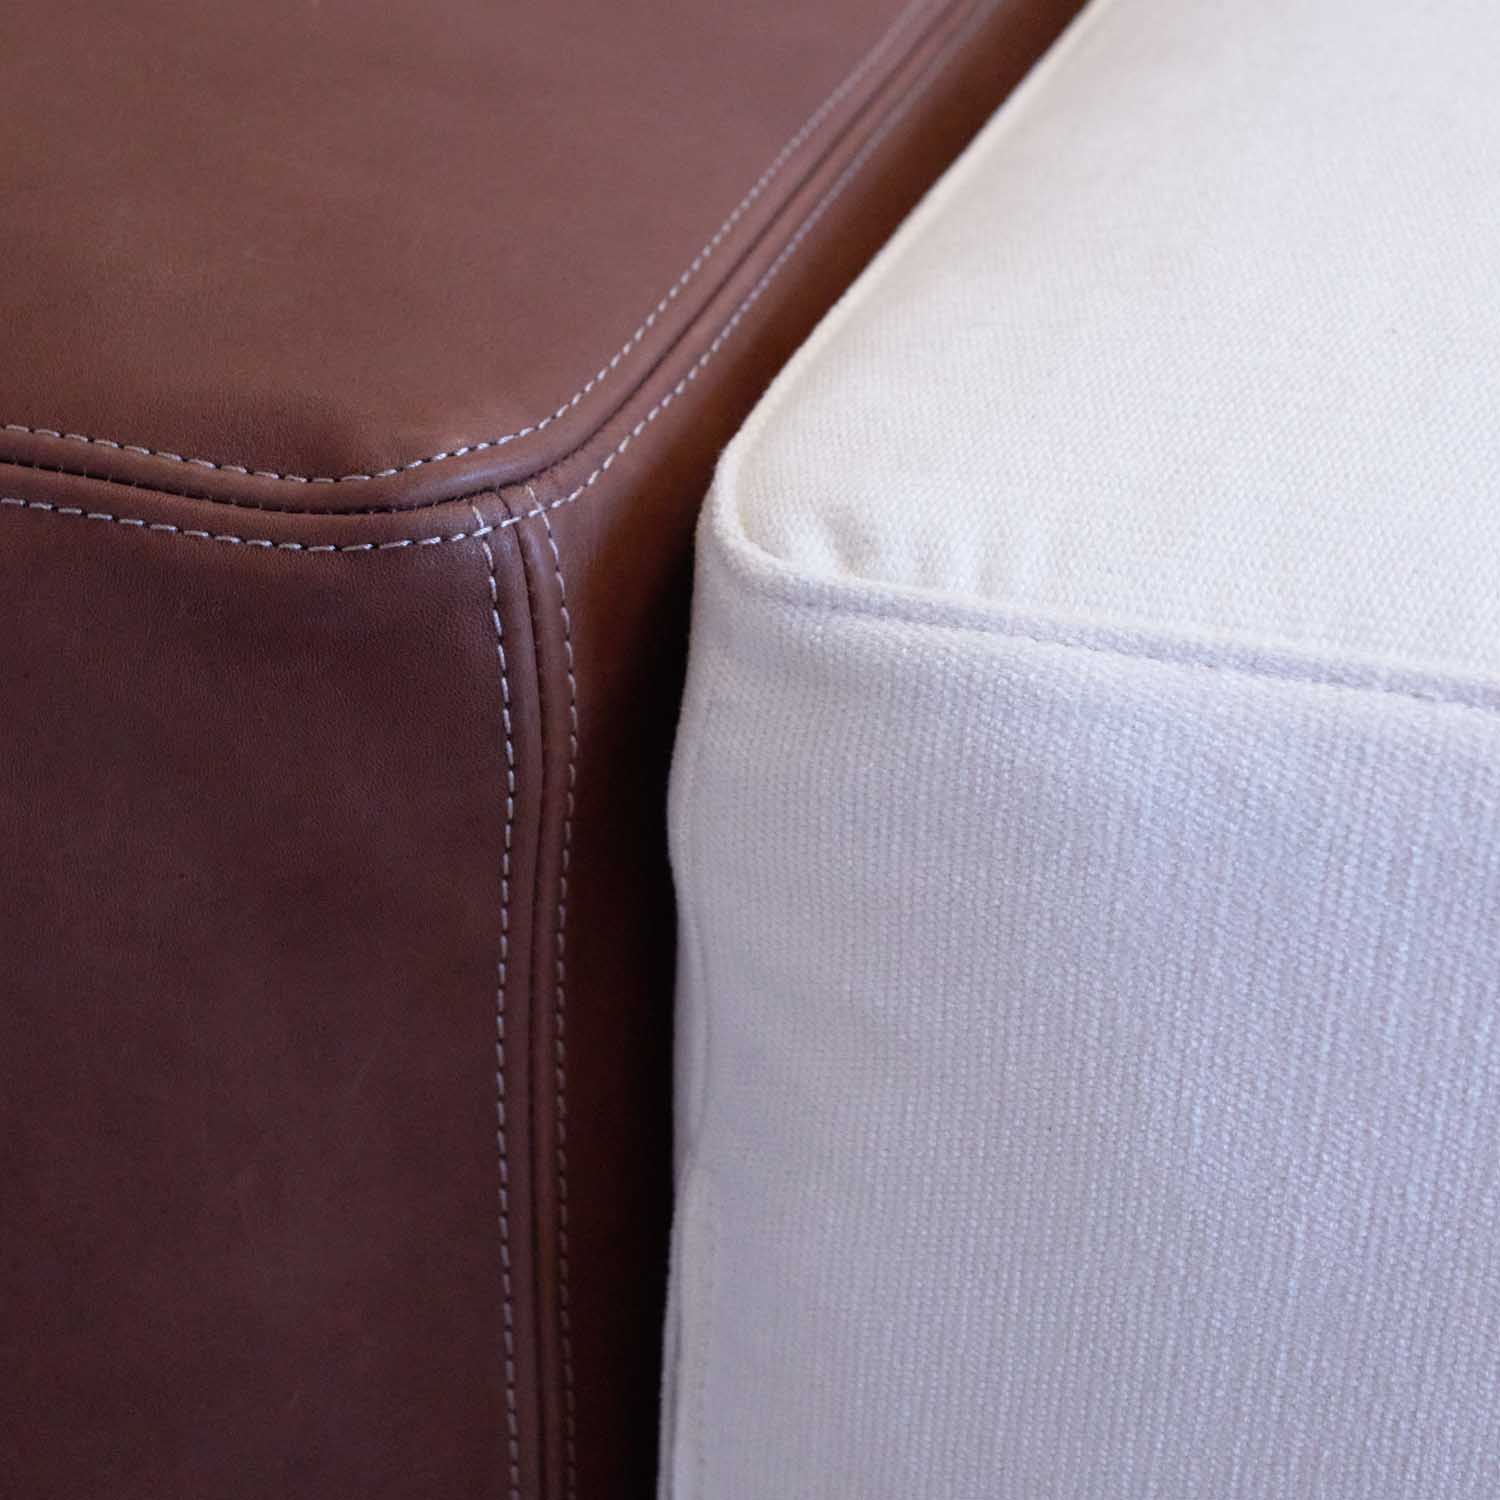 luxurious top stitching on leather sofa , detail